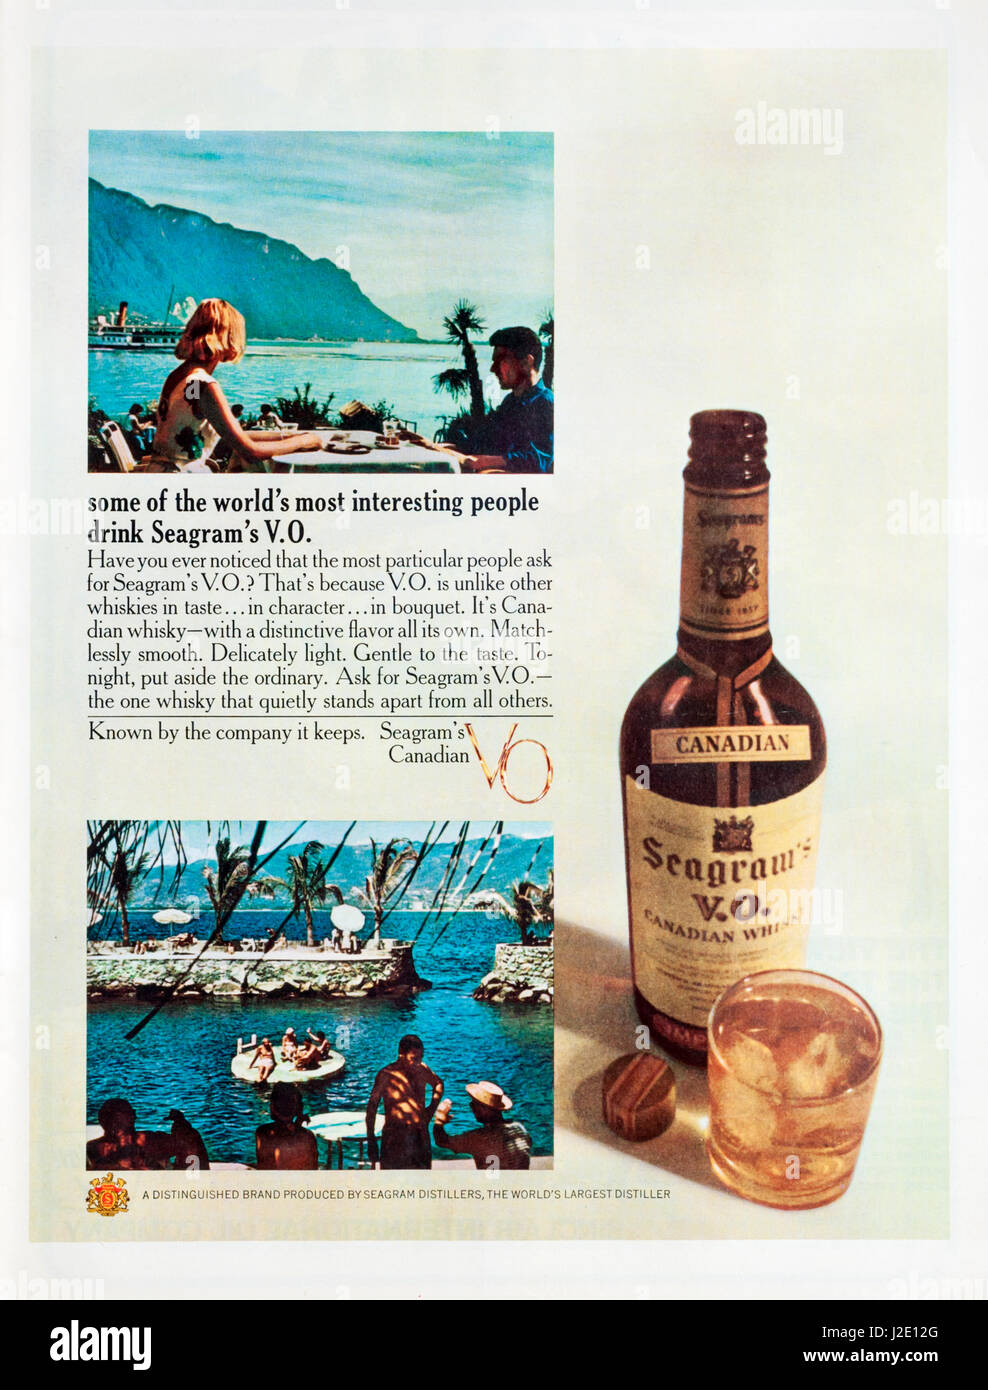 A 1960s magazine advert advertising Seagram's V.O. Canadian Whisky. Stock Photo